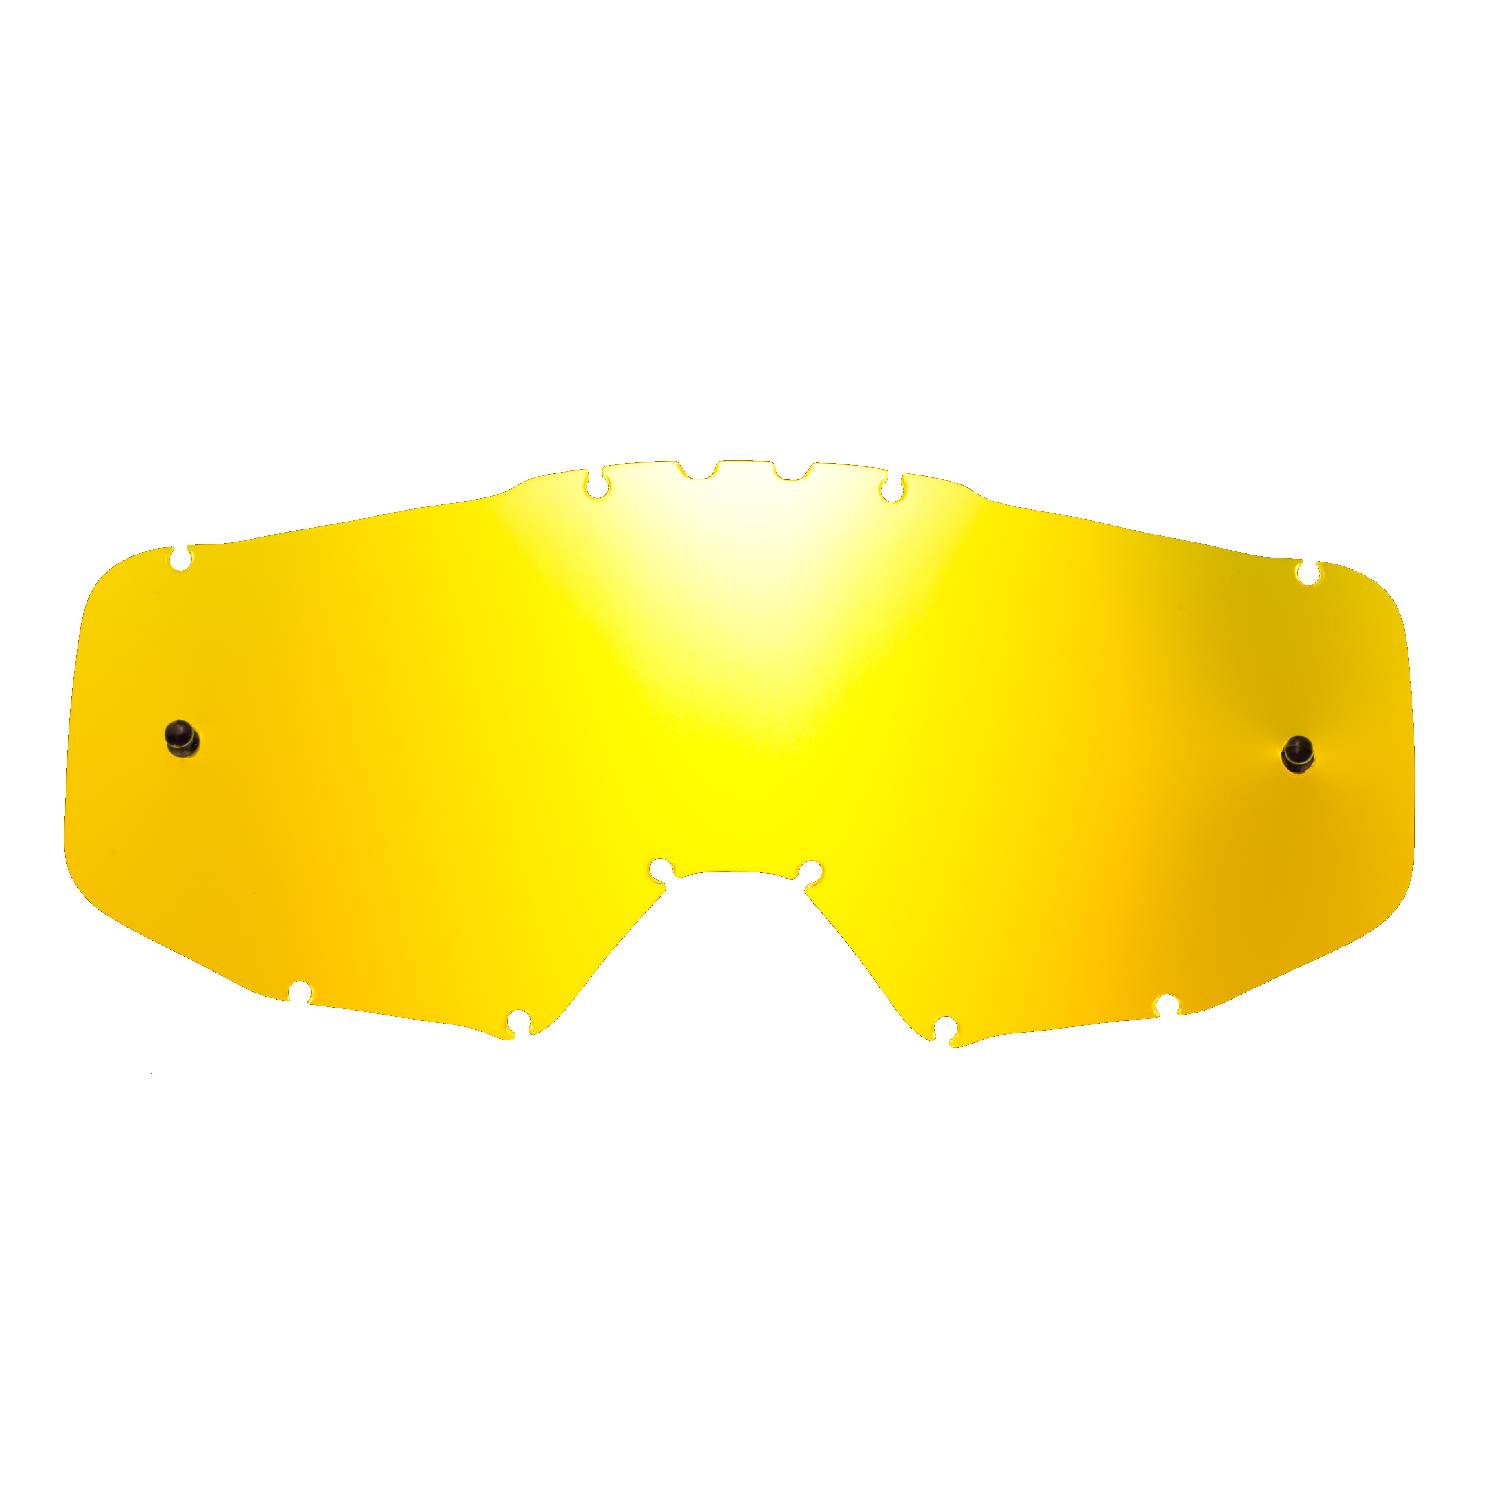 gold-toned mirrored replacement lenses for goggles compatible for Just1 Iris / Vitro goggle